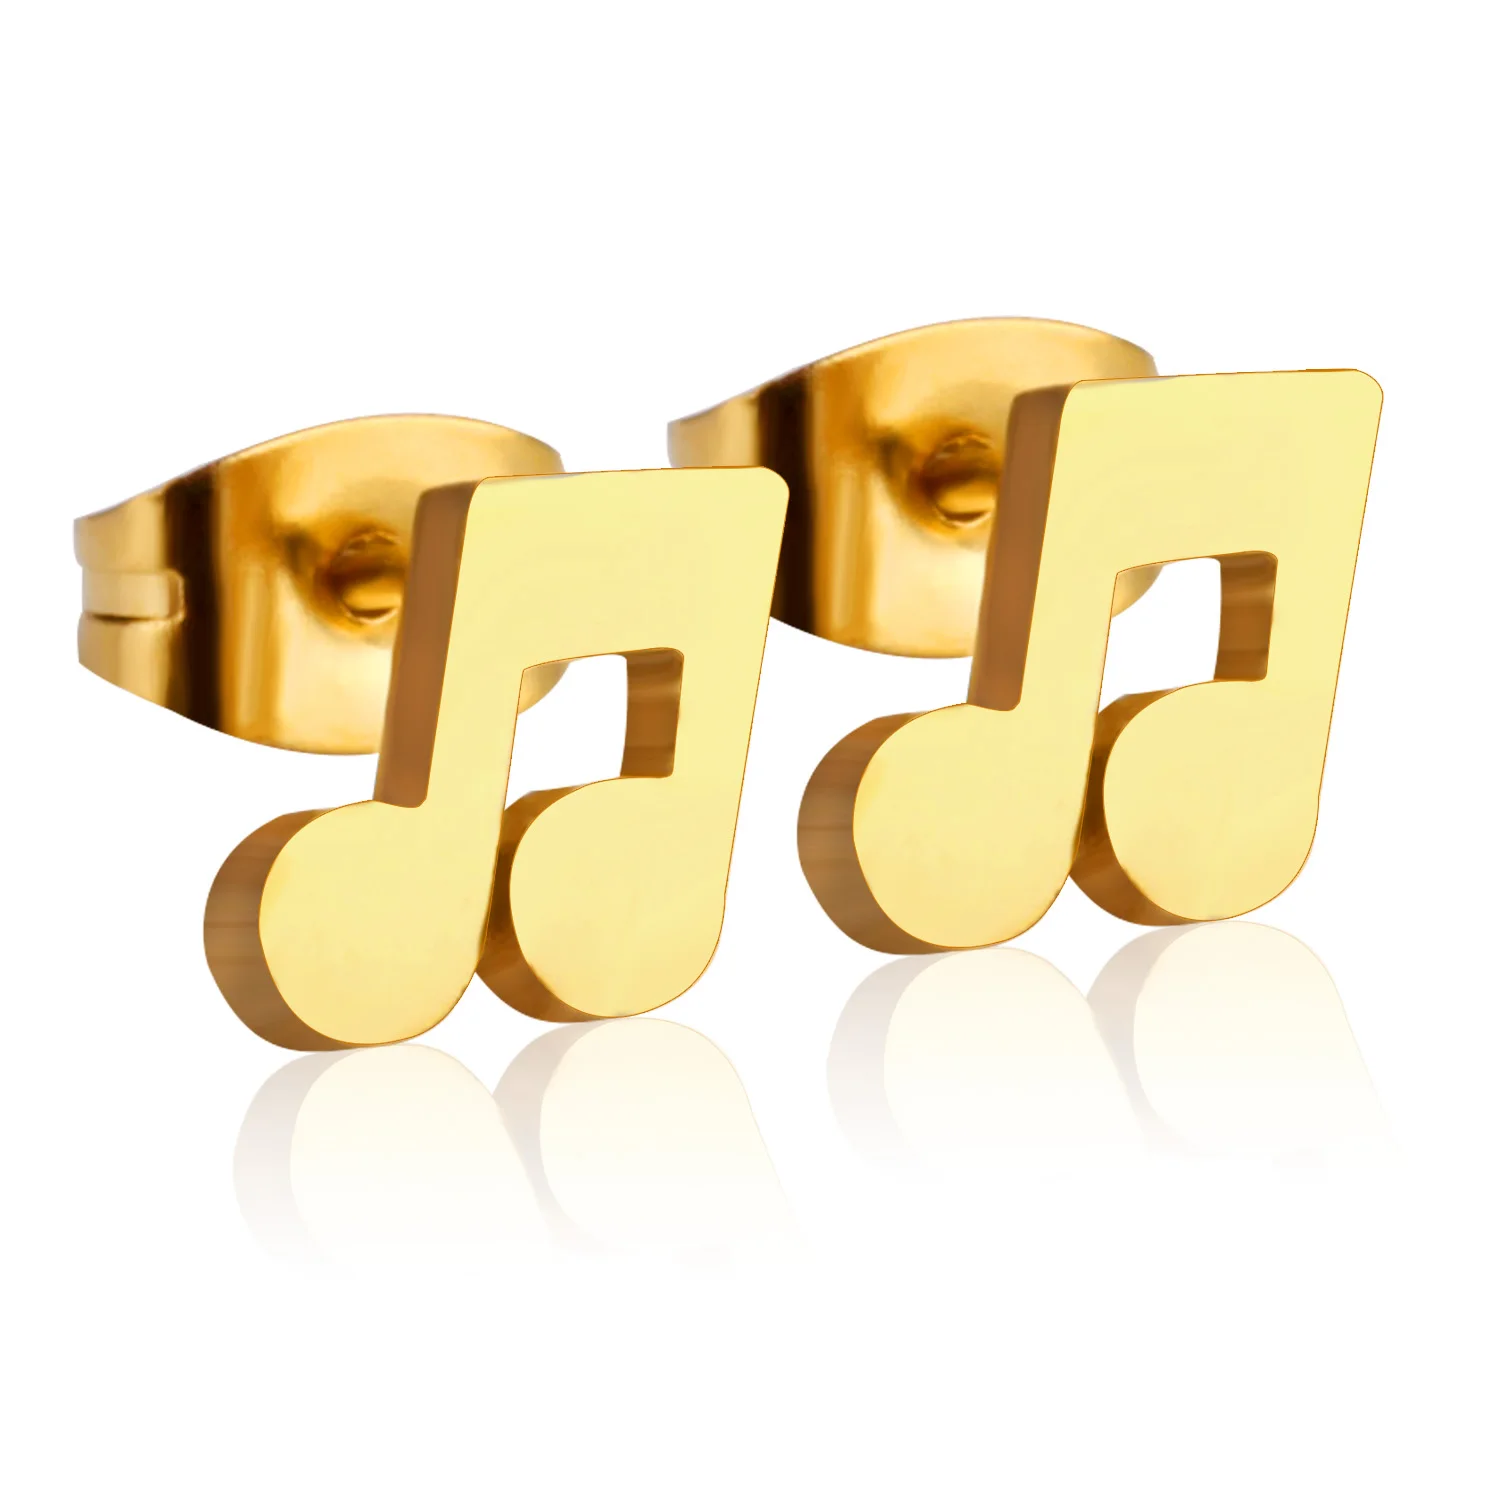 

Creative Stainless Steel Stud Earrings Gold Silver Jewelry Music Notes Earrings For Sale, Gold/silver available